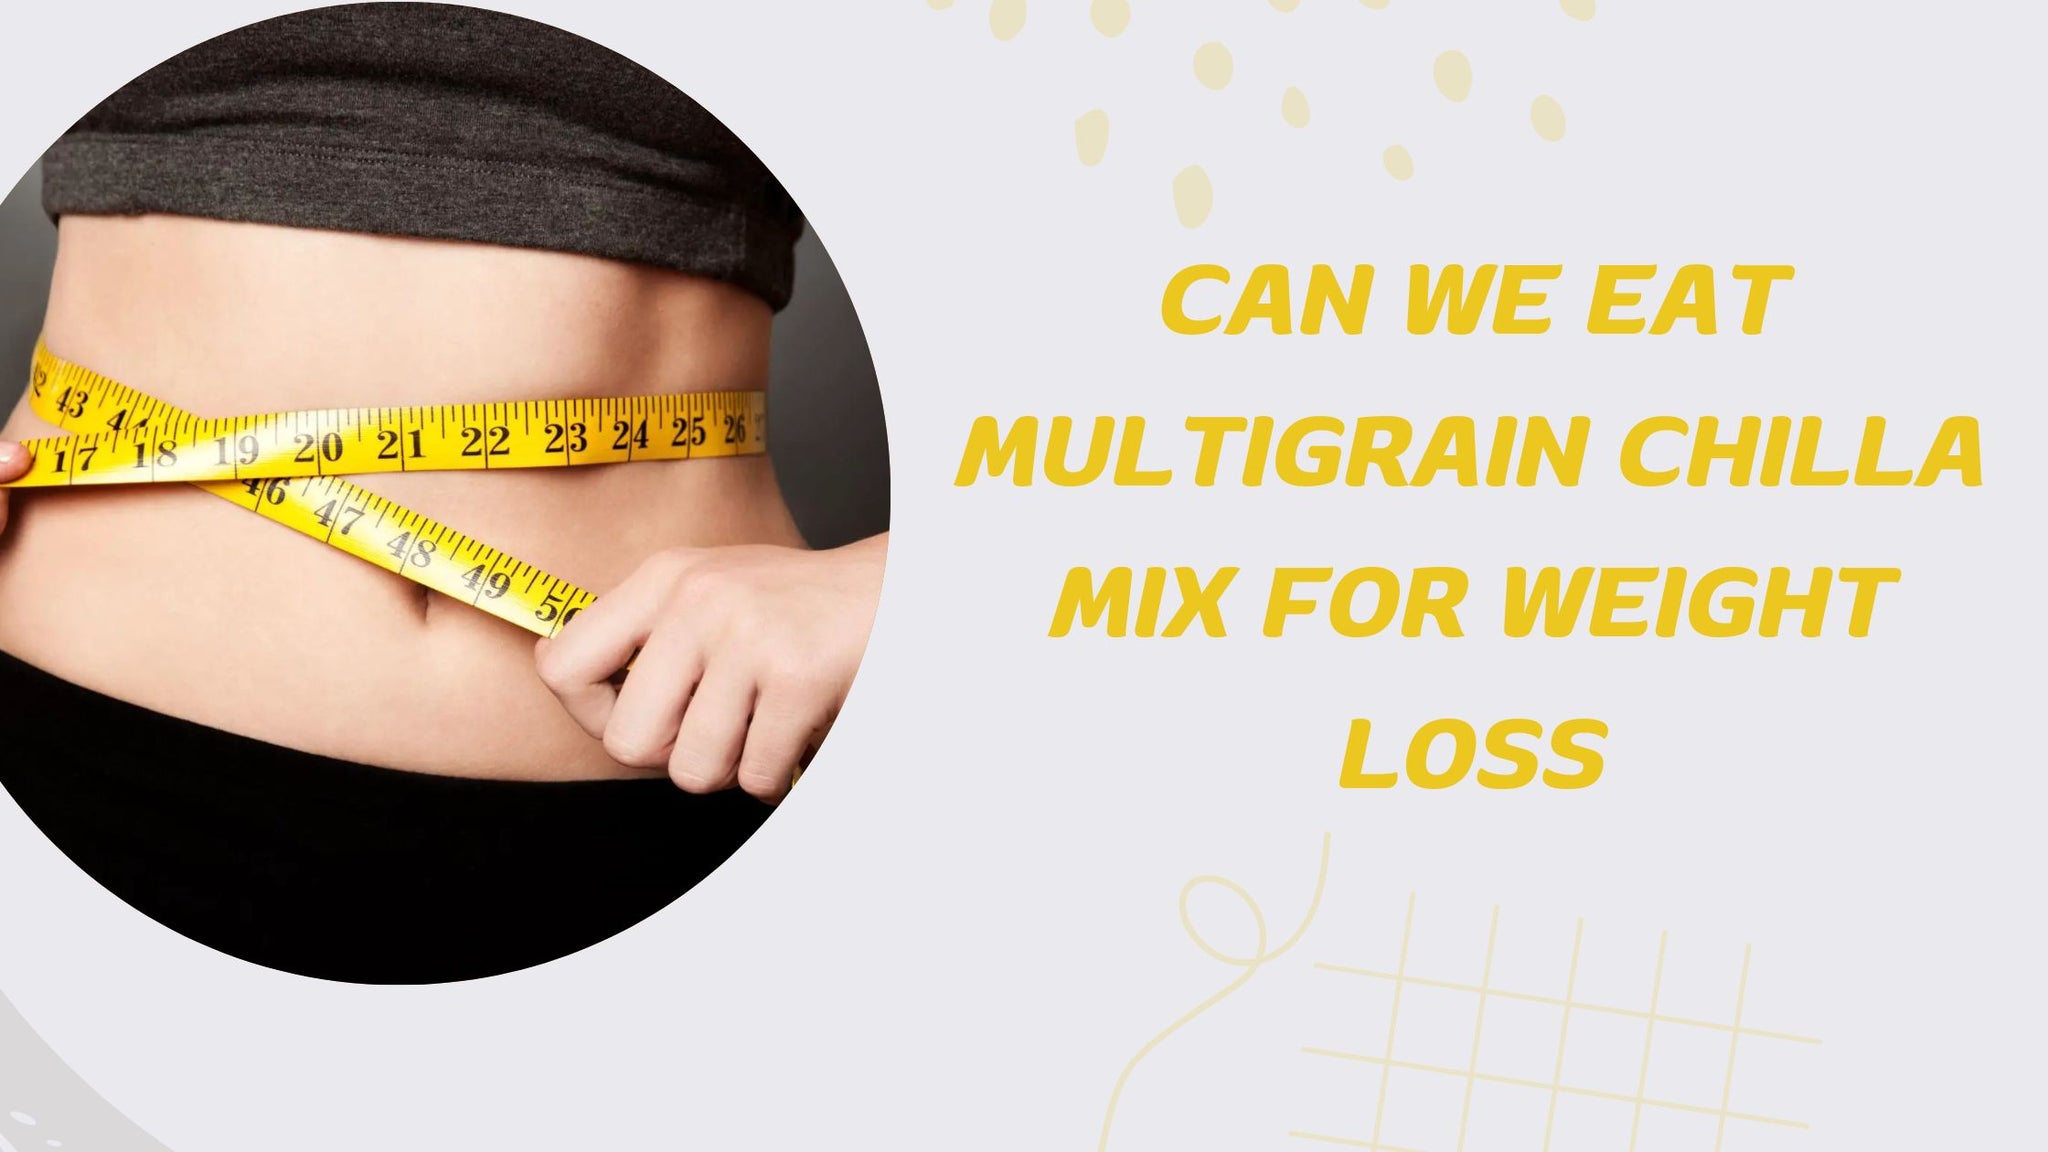 Can We Eat Multigrain Chilla Mix in Dinner for Weight Loss